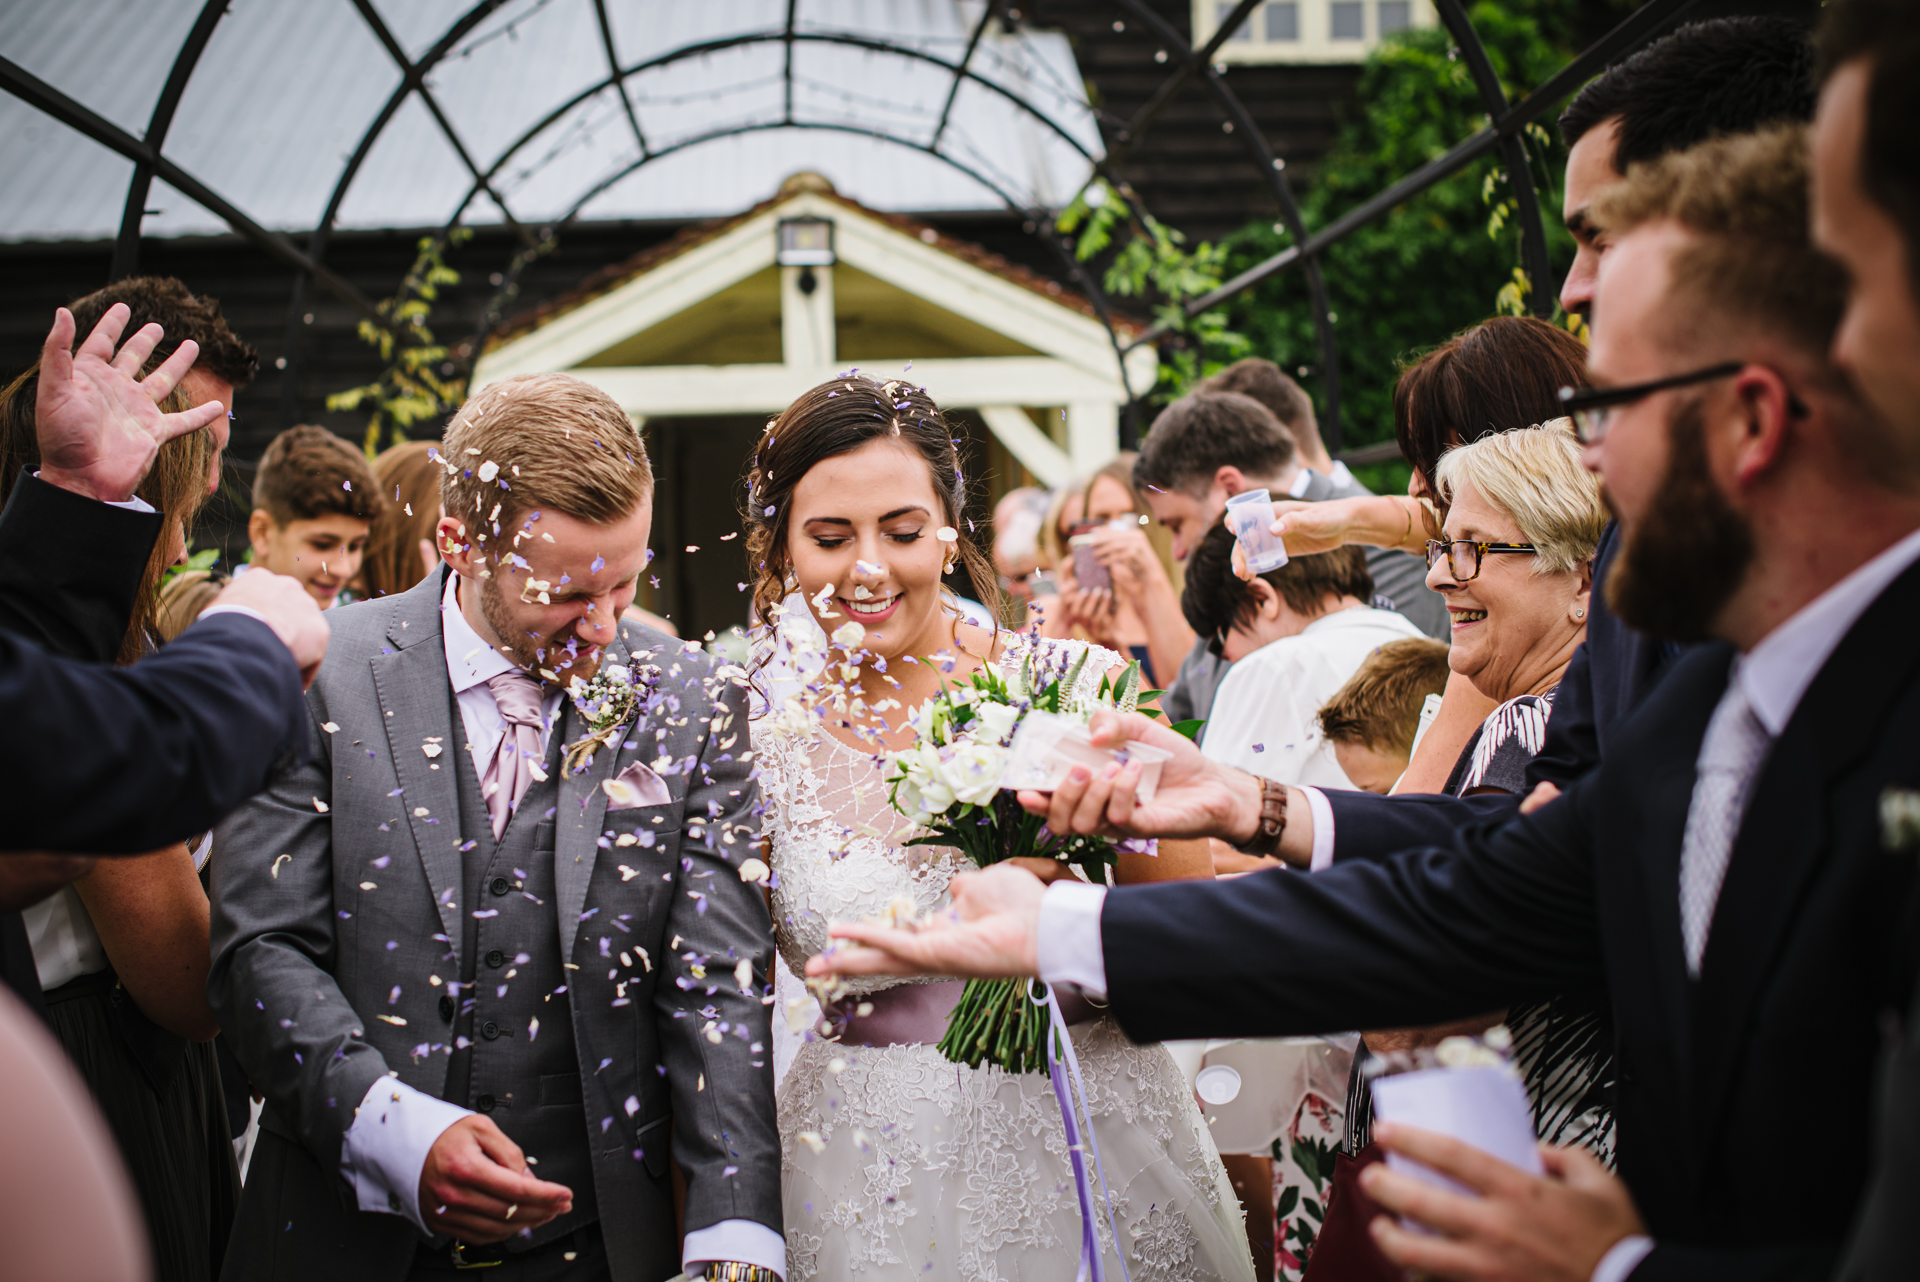 Guests throw confetti at the happy couple after their wedding ceremony at Milling Barn, Hertfordshire